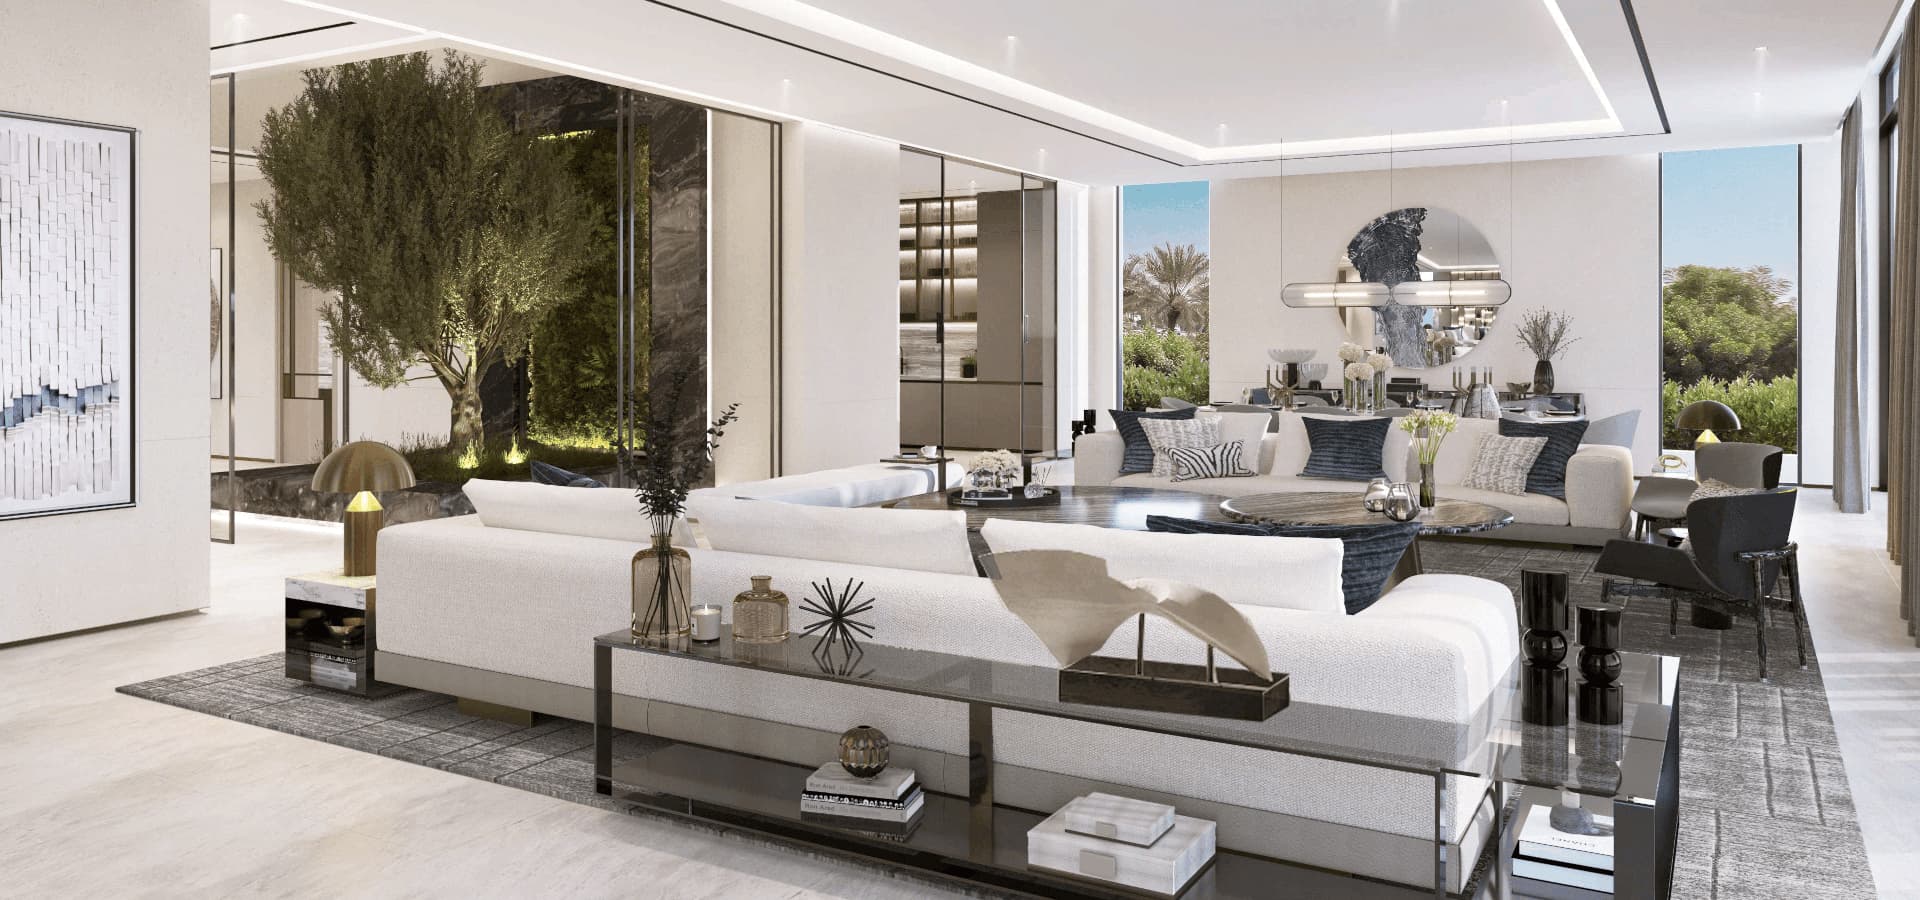 Signature Mansions by Signature Developers in Jumeirah Golf Estates ...